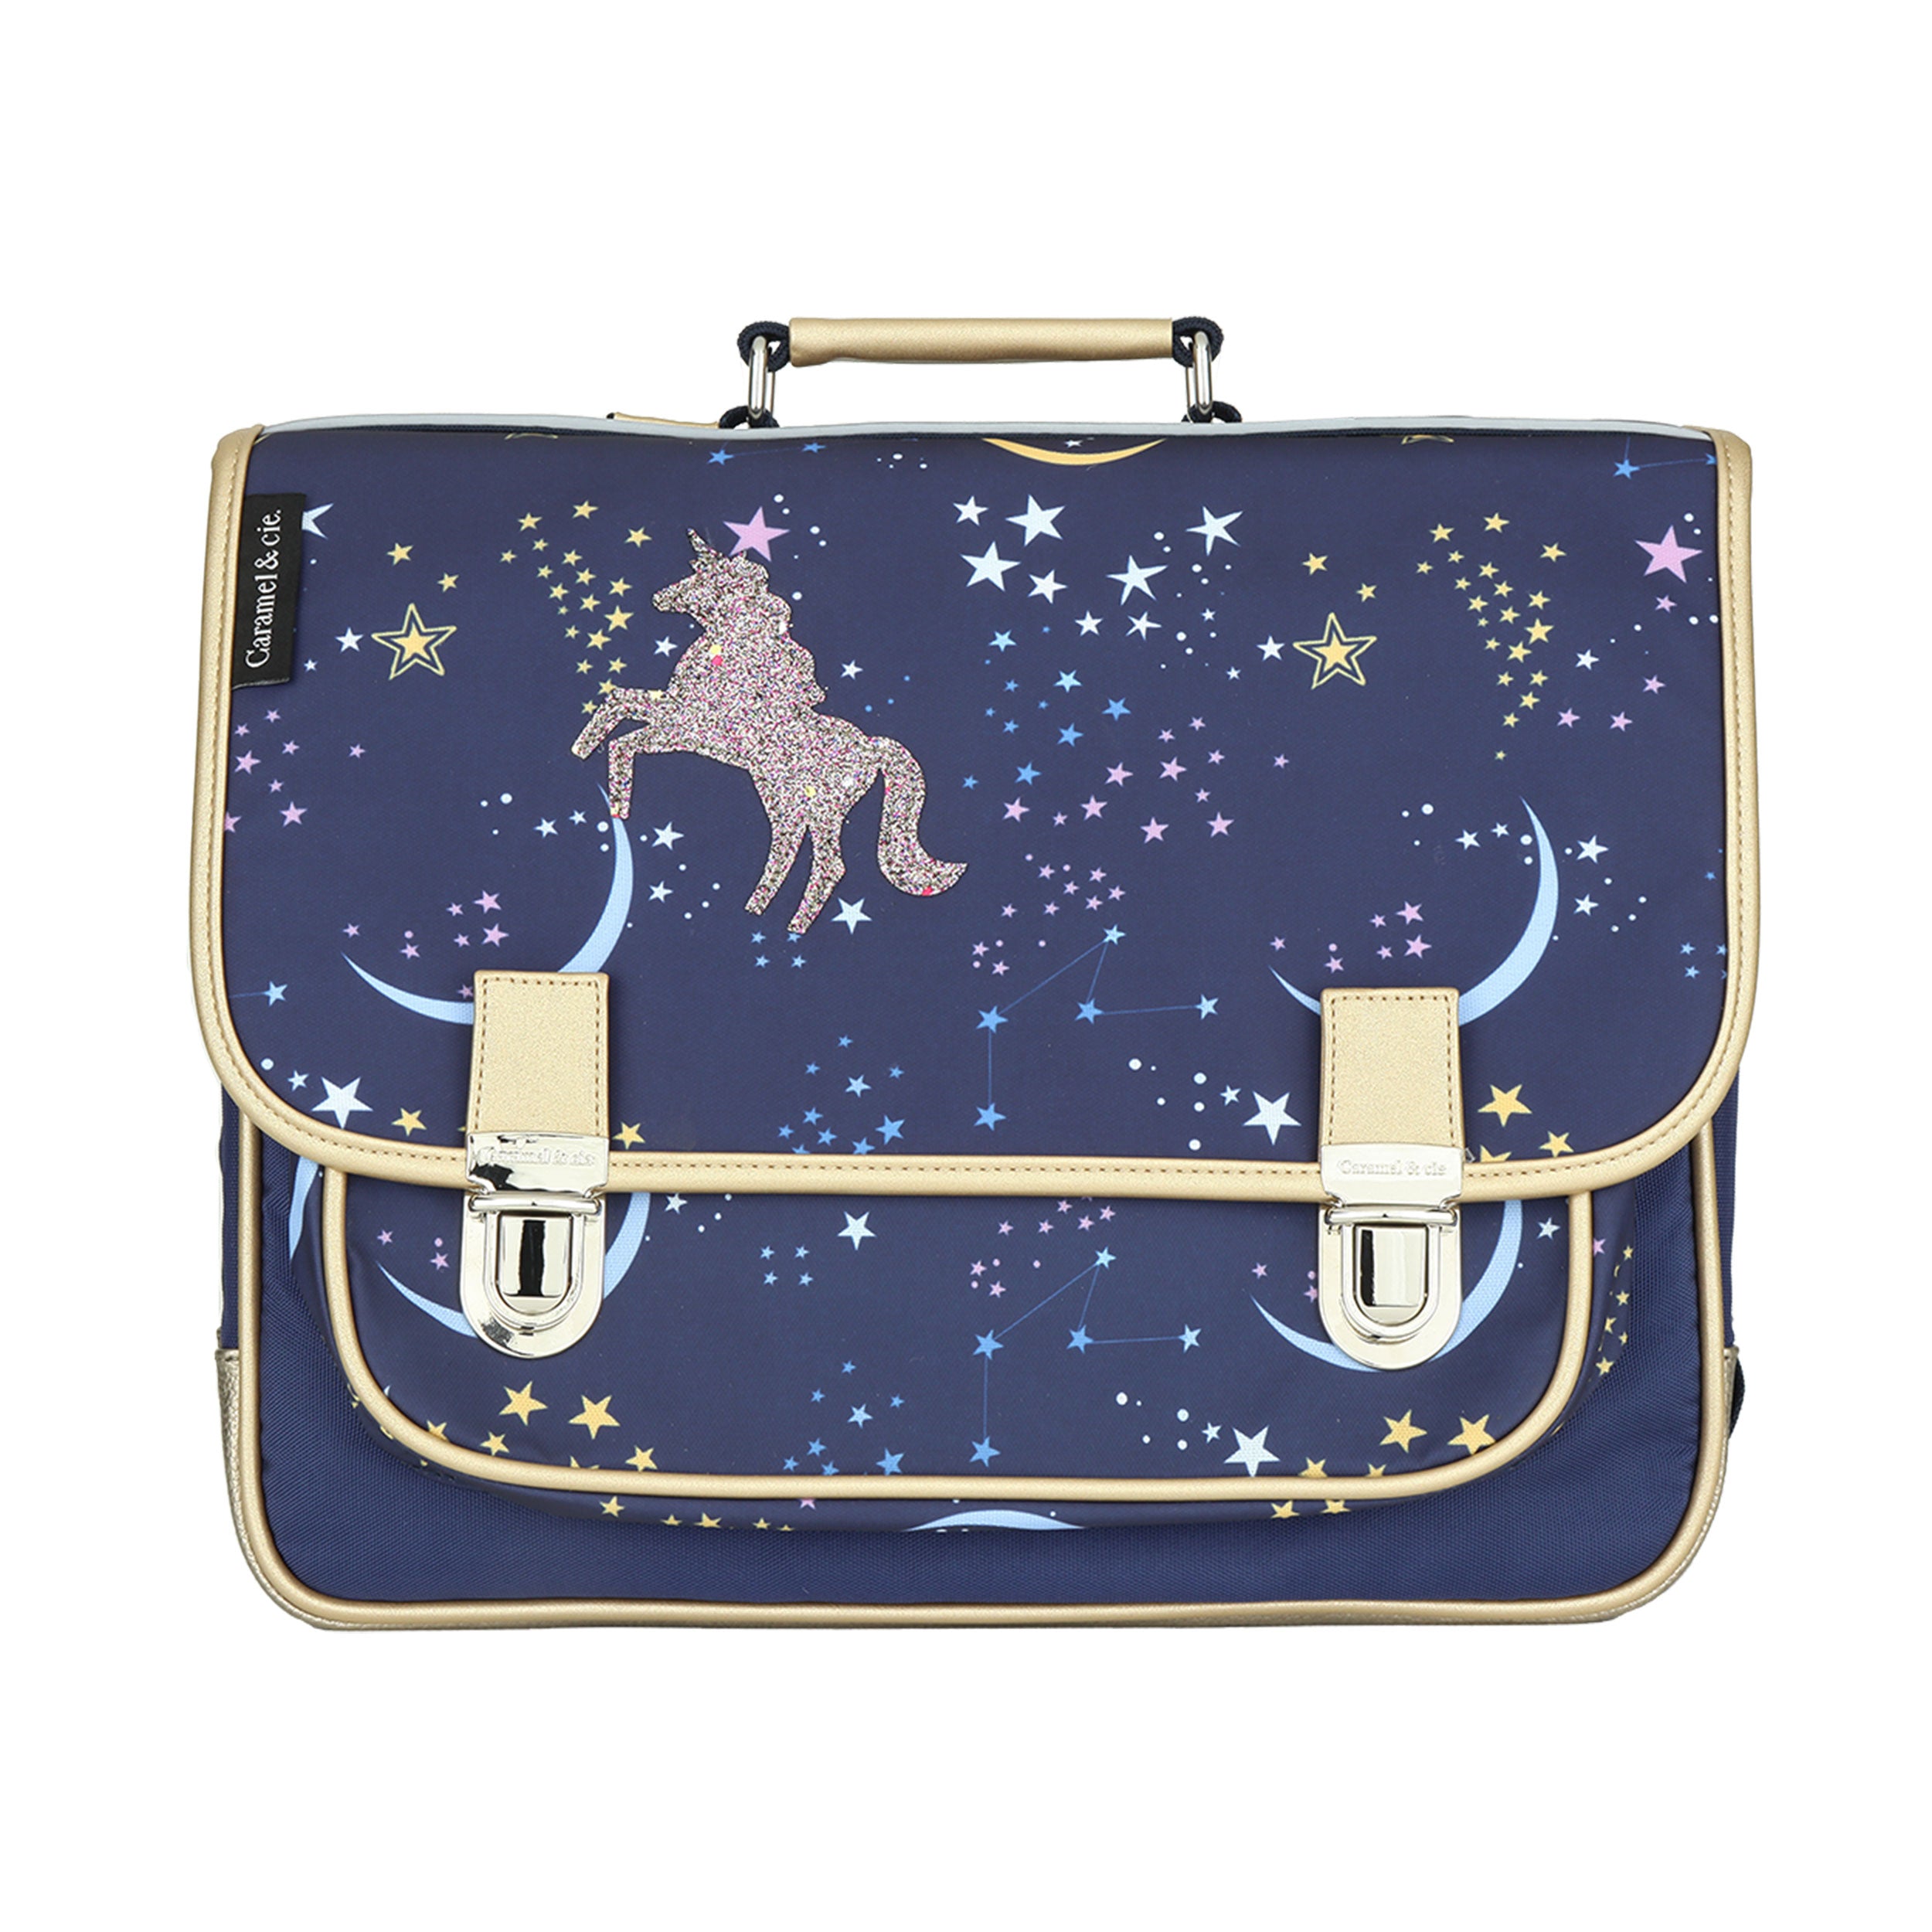 Grand Cartable Constellation Nuit (6959108980799)